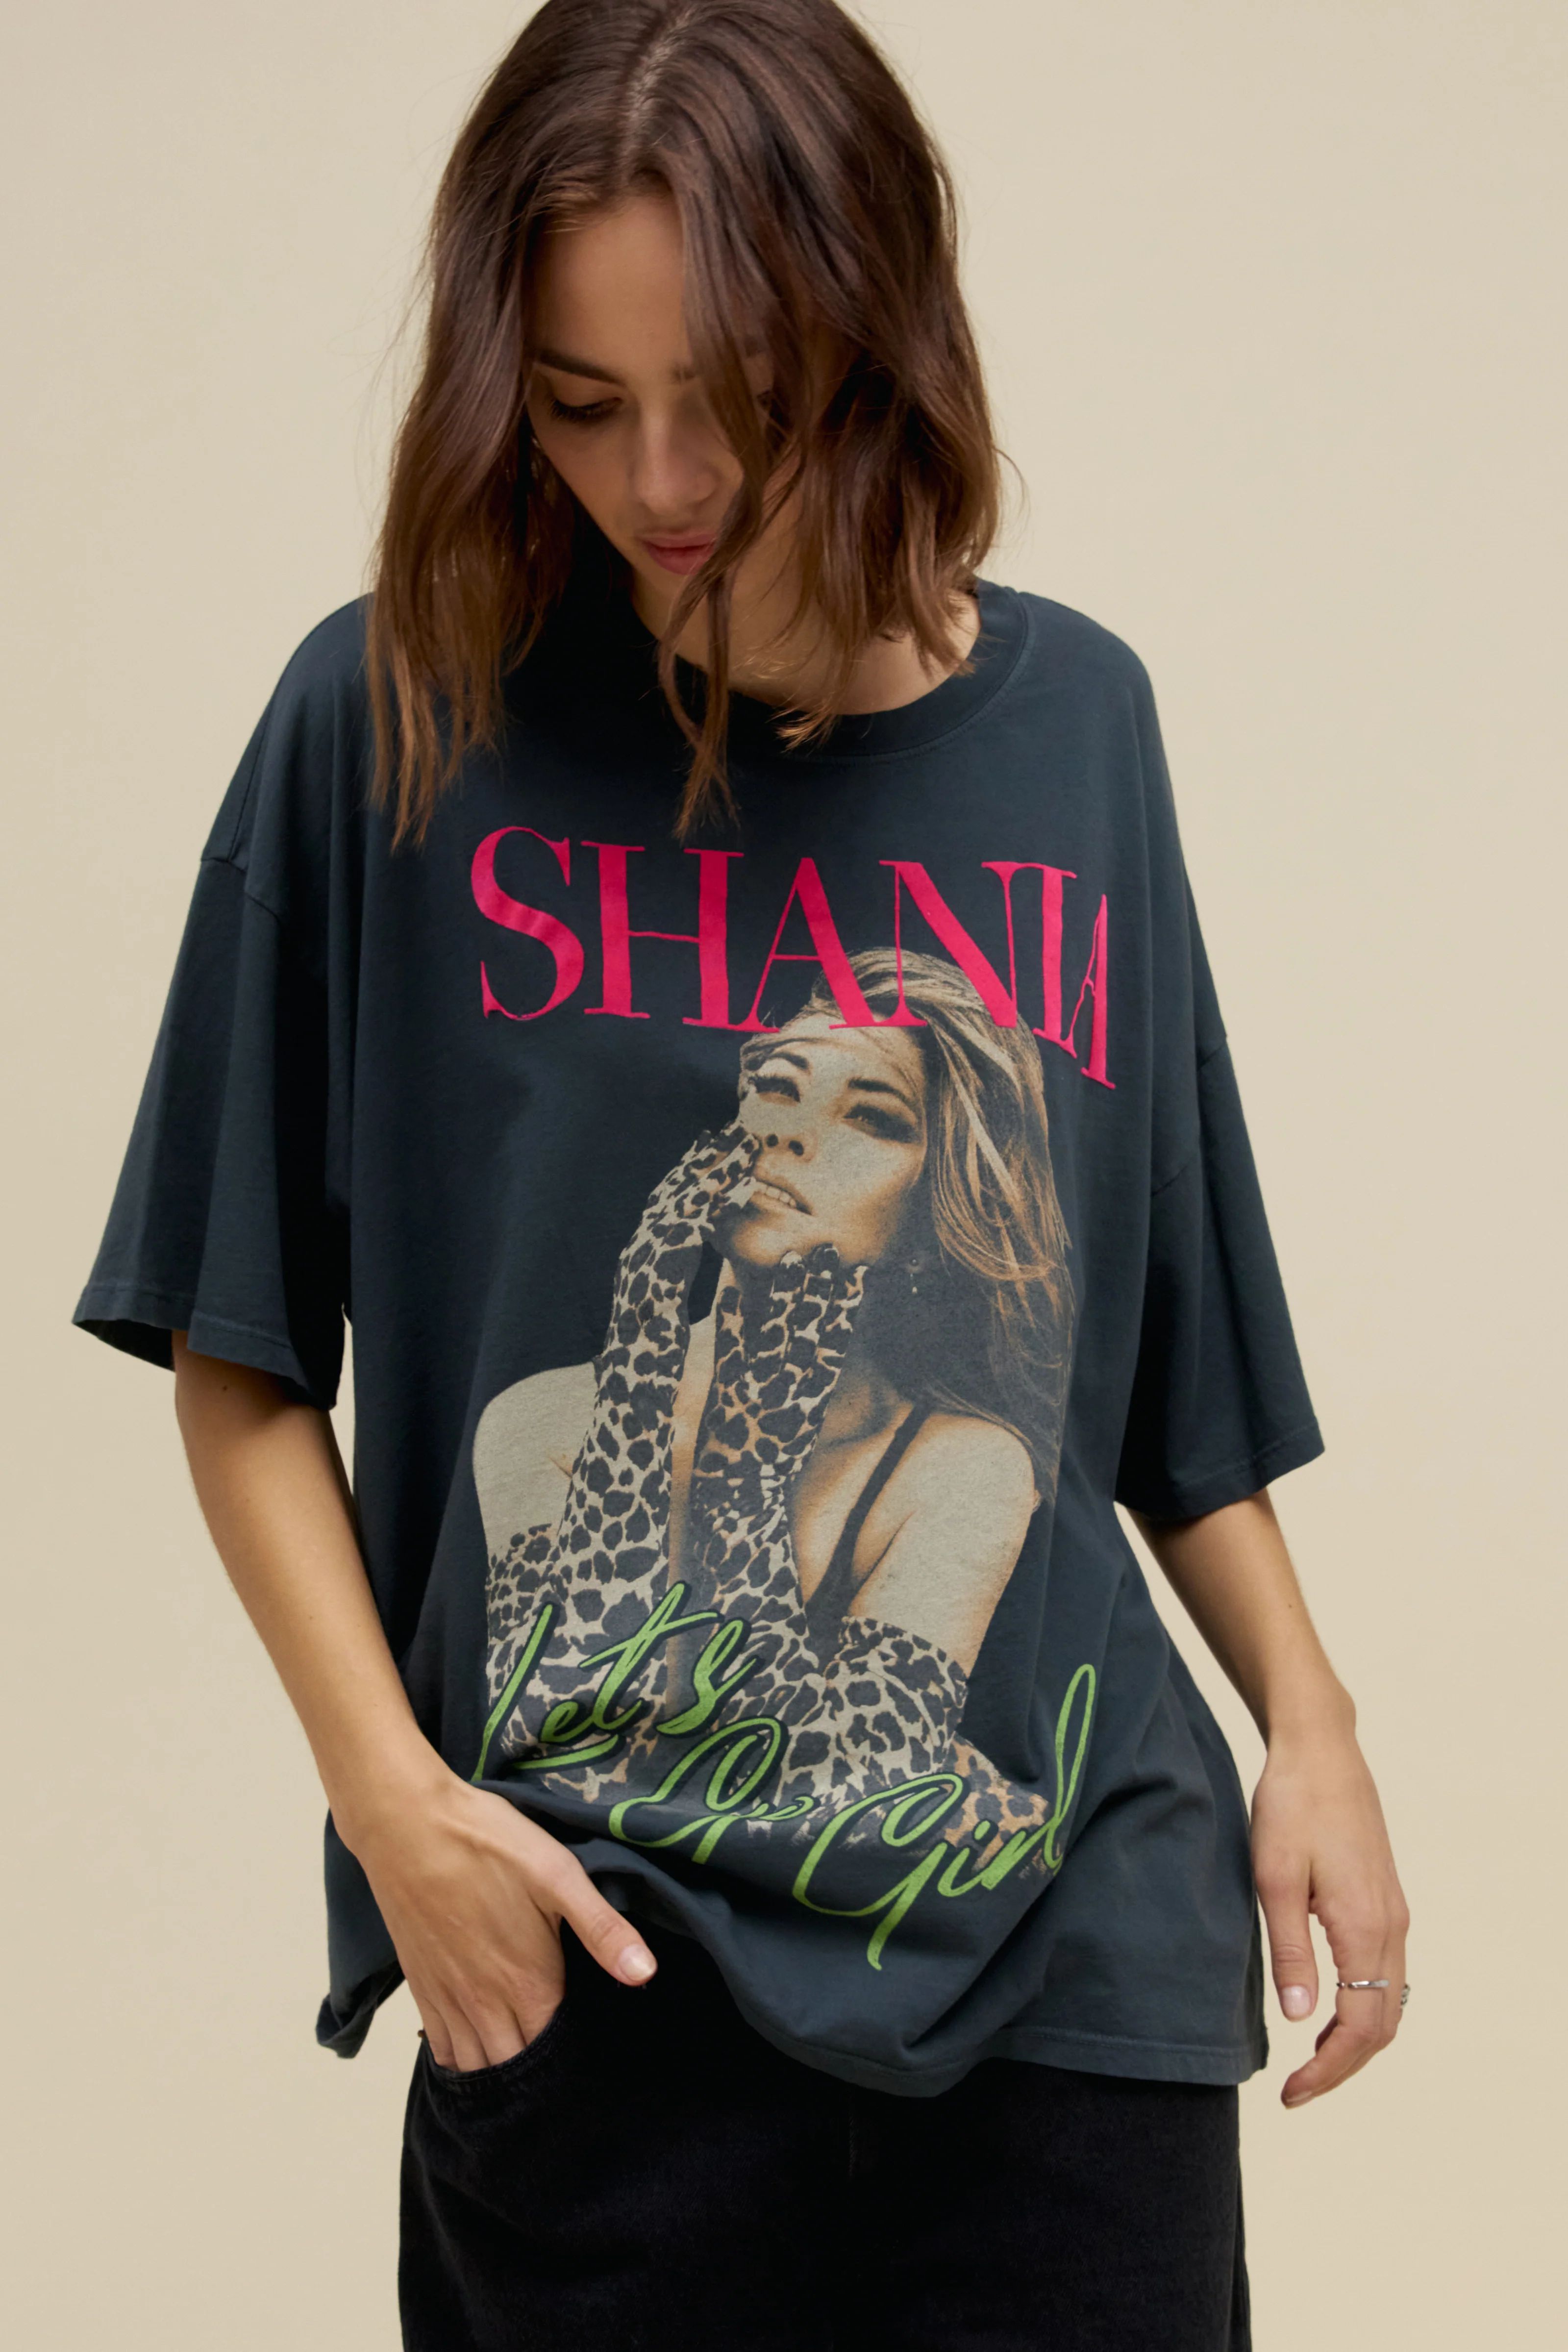 Shania Let's Go Girls OS Tee in Vintage Black | Daydreamer